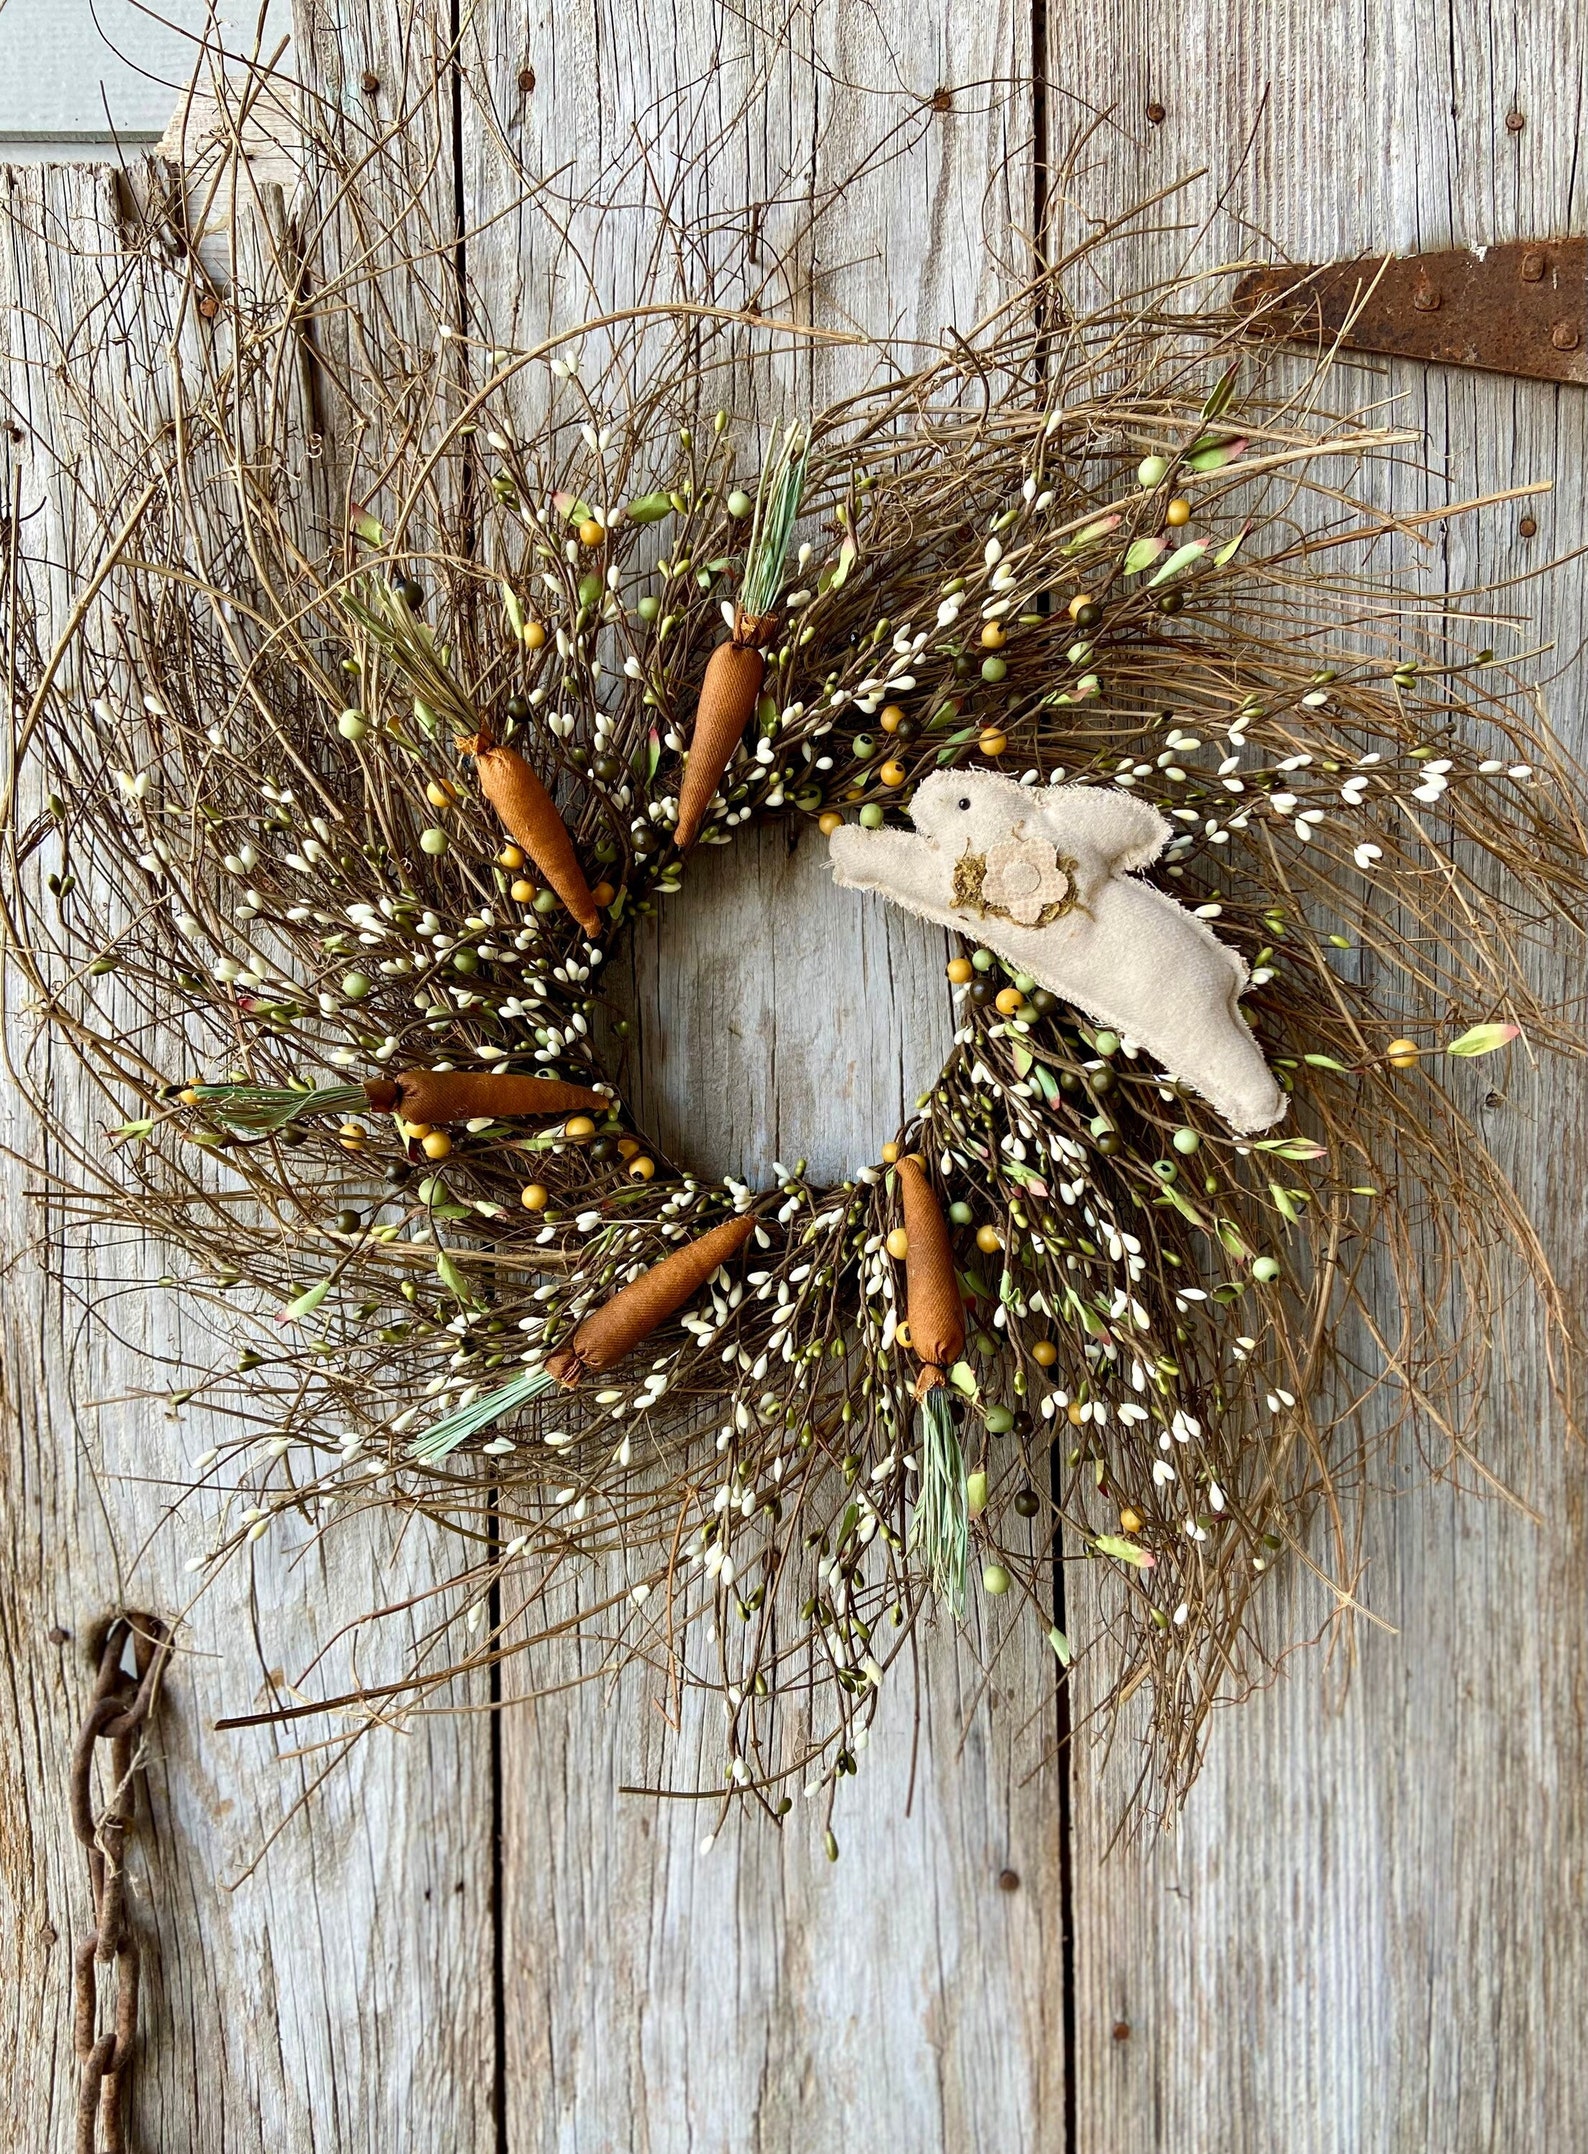 Bunny Twig Berry Wreaths with Carrots